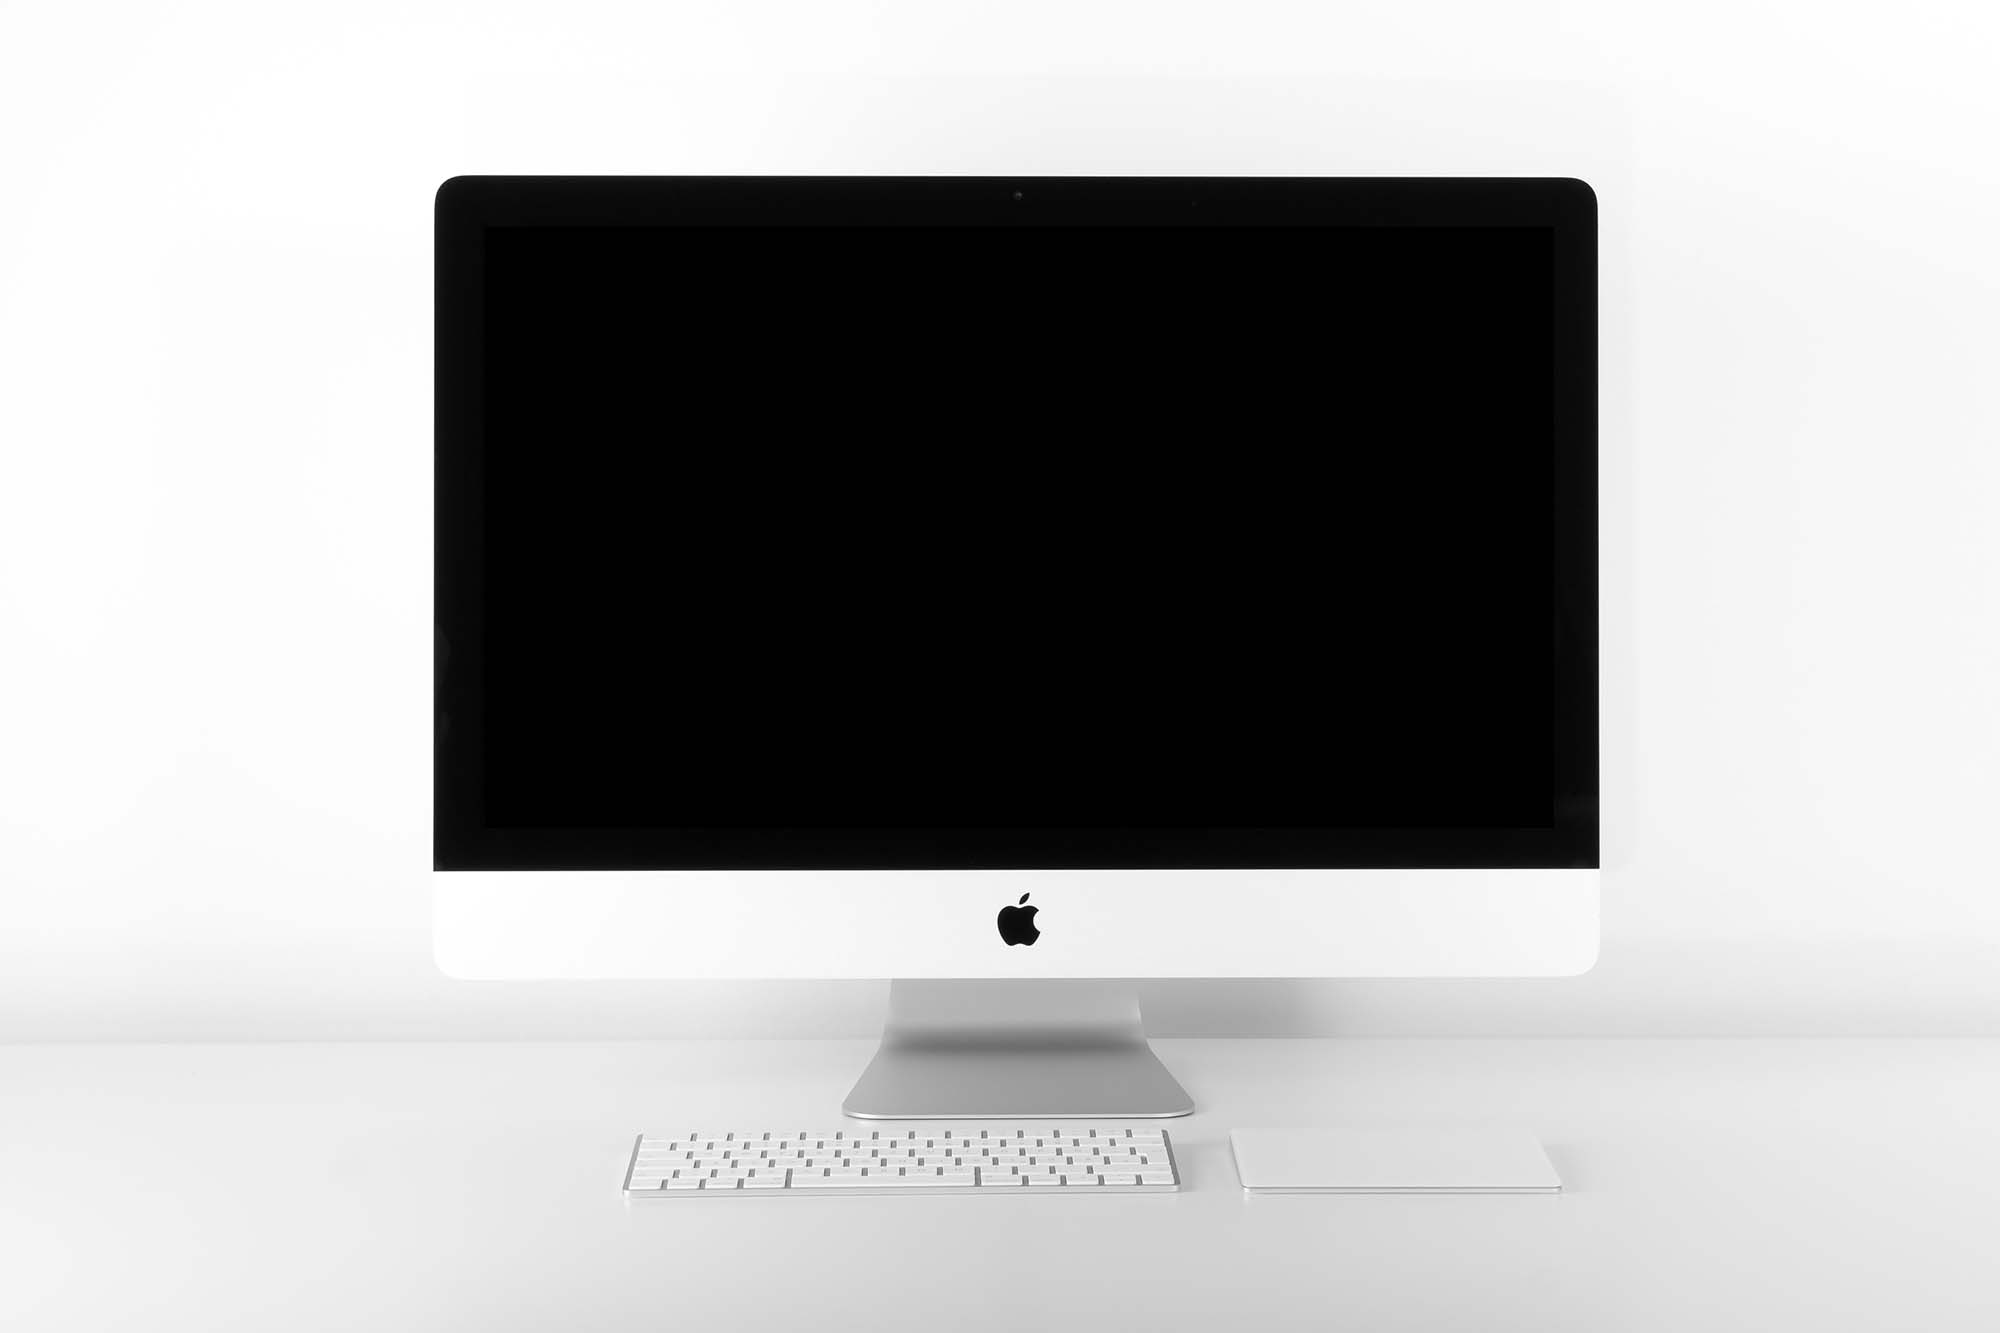 High-resolution iMac mockup on white background with keyboard and mouse, perfect for website design presentations.